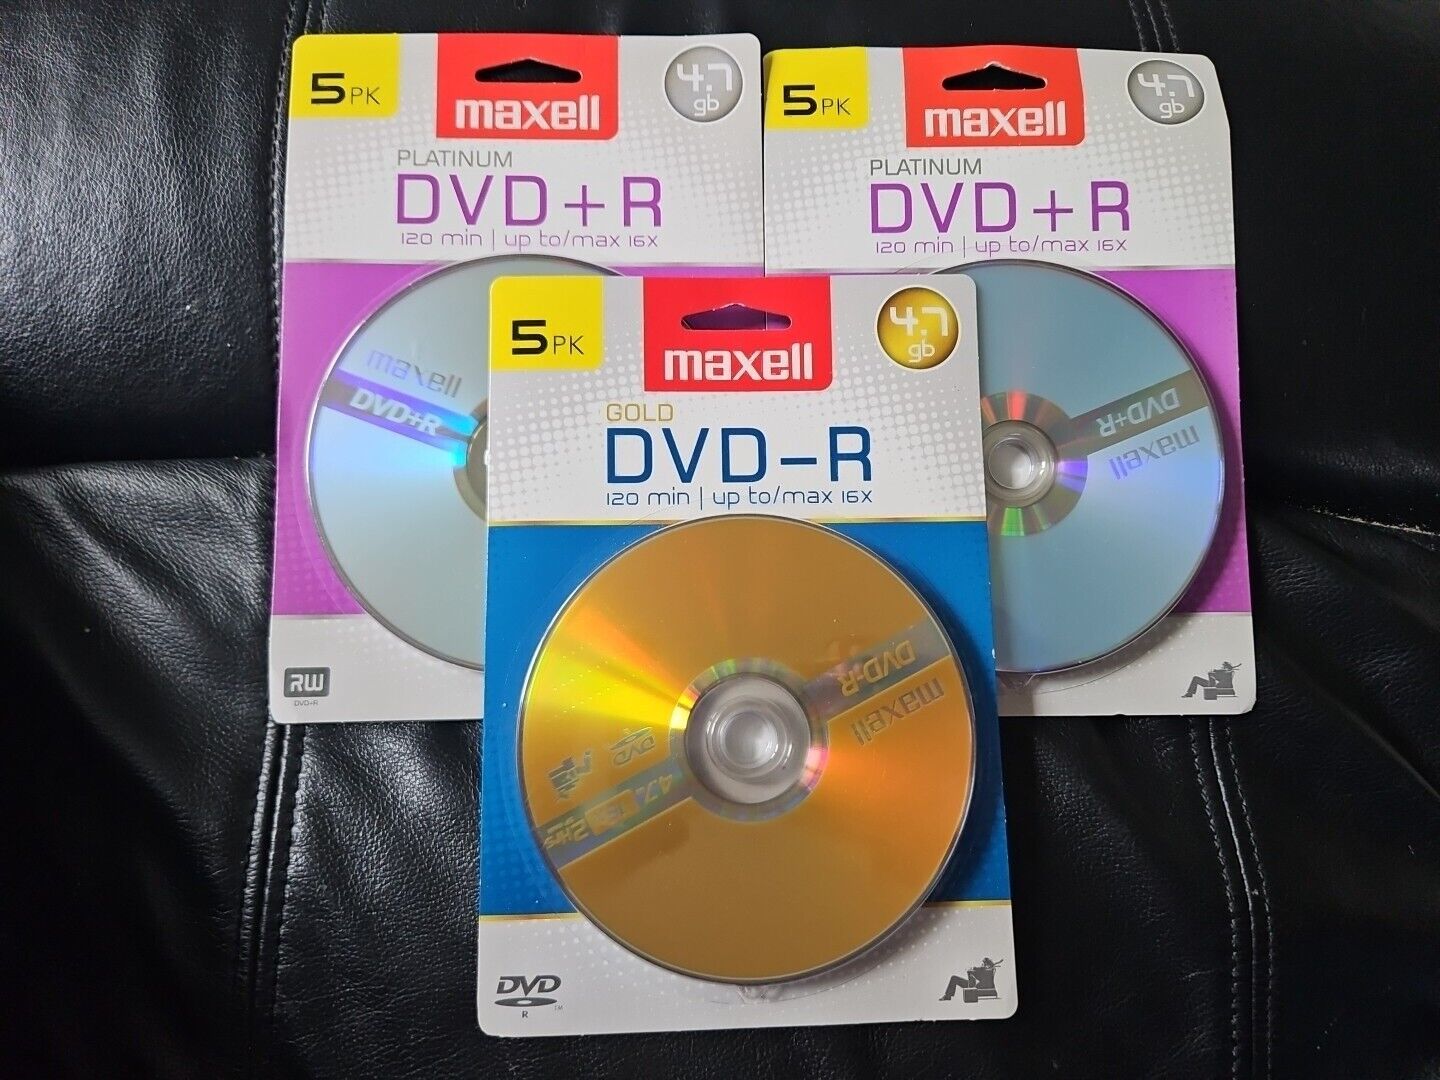 Maxell DVD + R LOT of 3 Packs (2) Platinum (1) Gold 15 Total SEALED NEW 4.7GB 